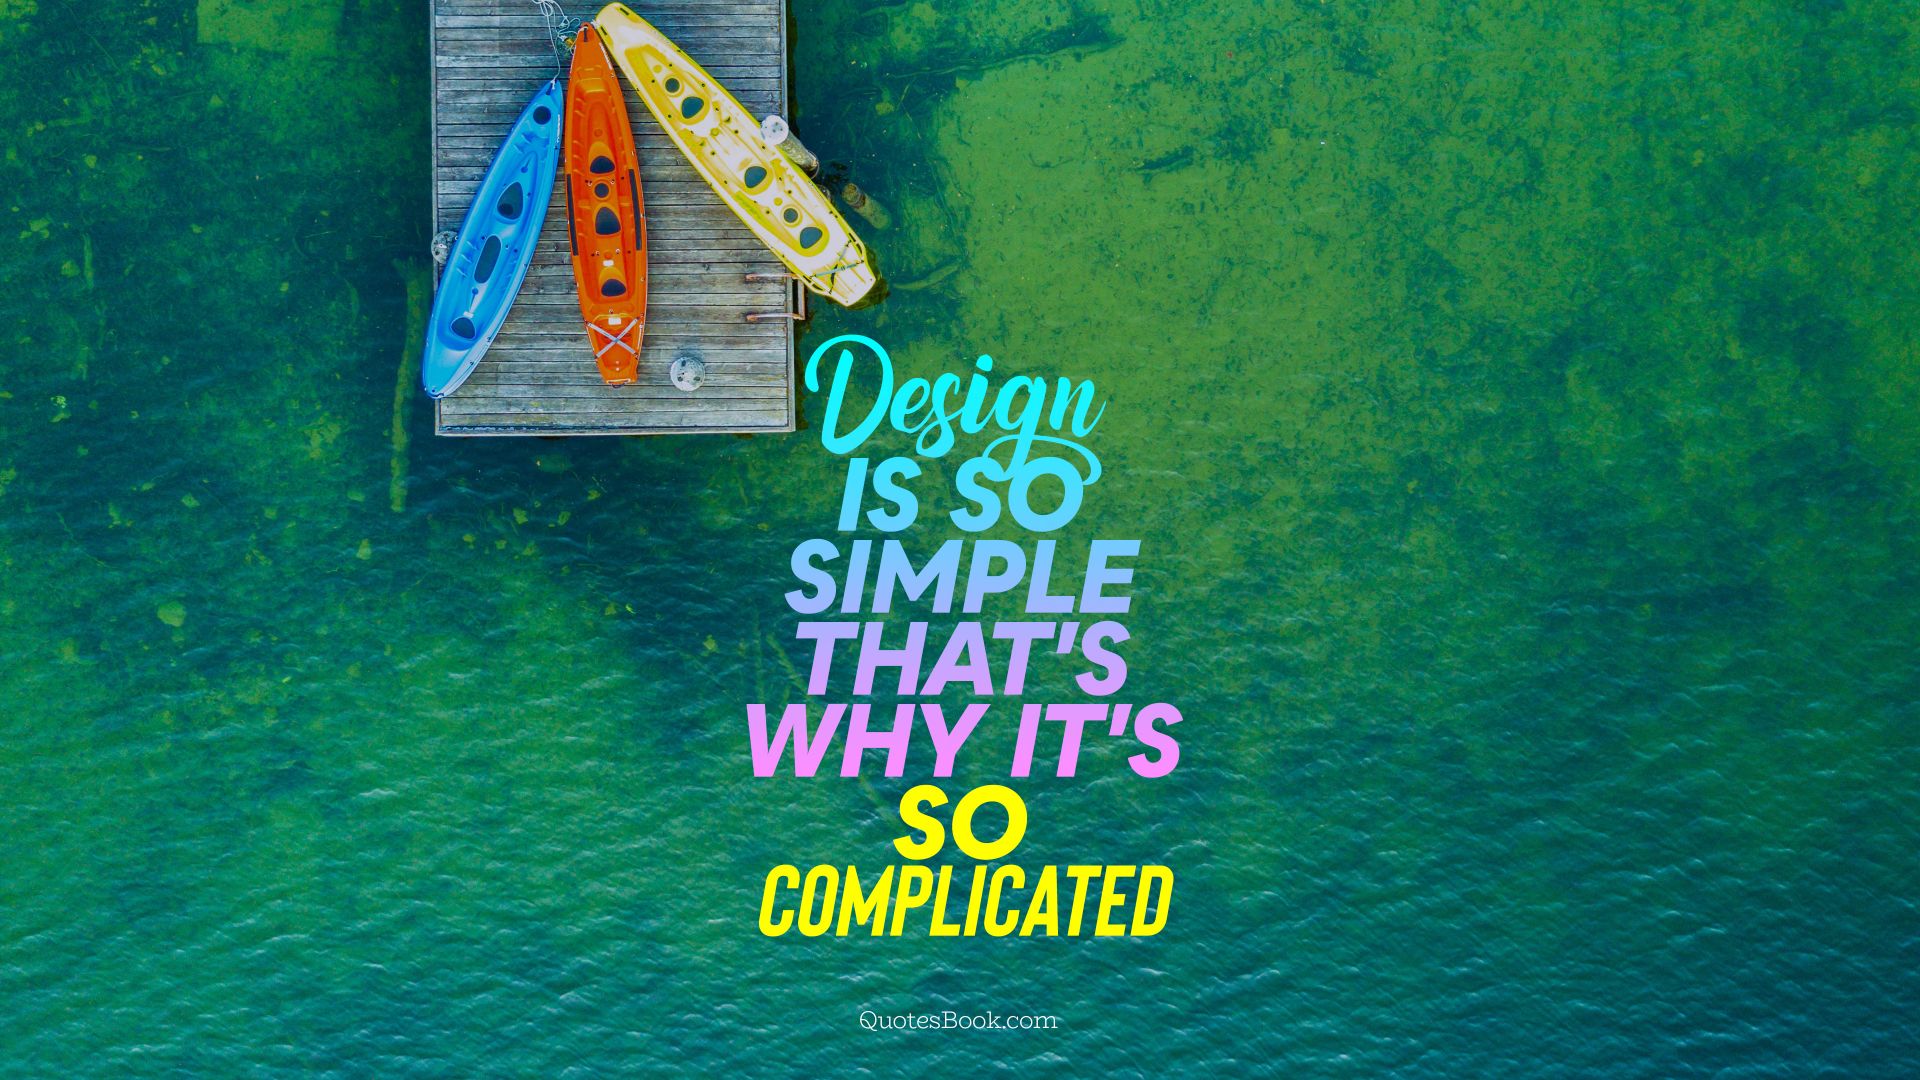 Design is so simple that's why it's so complicated